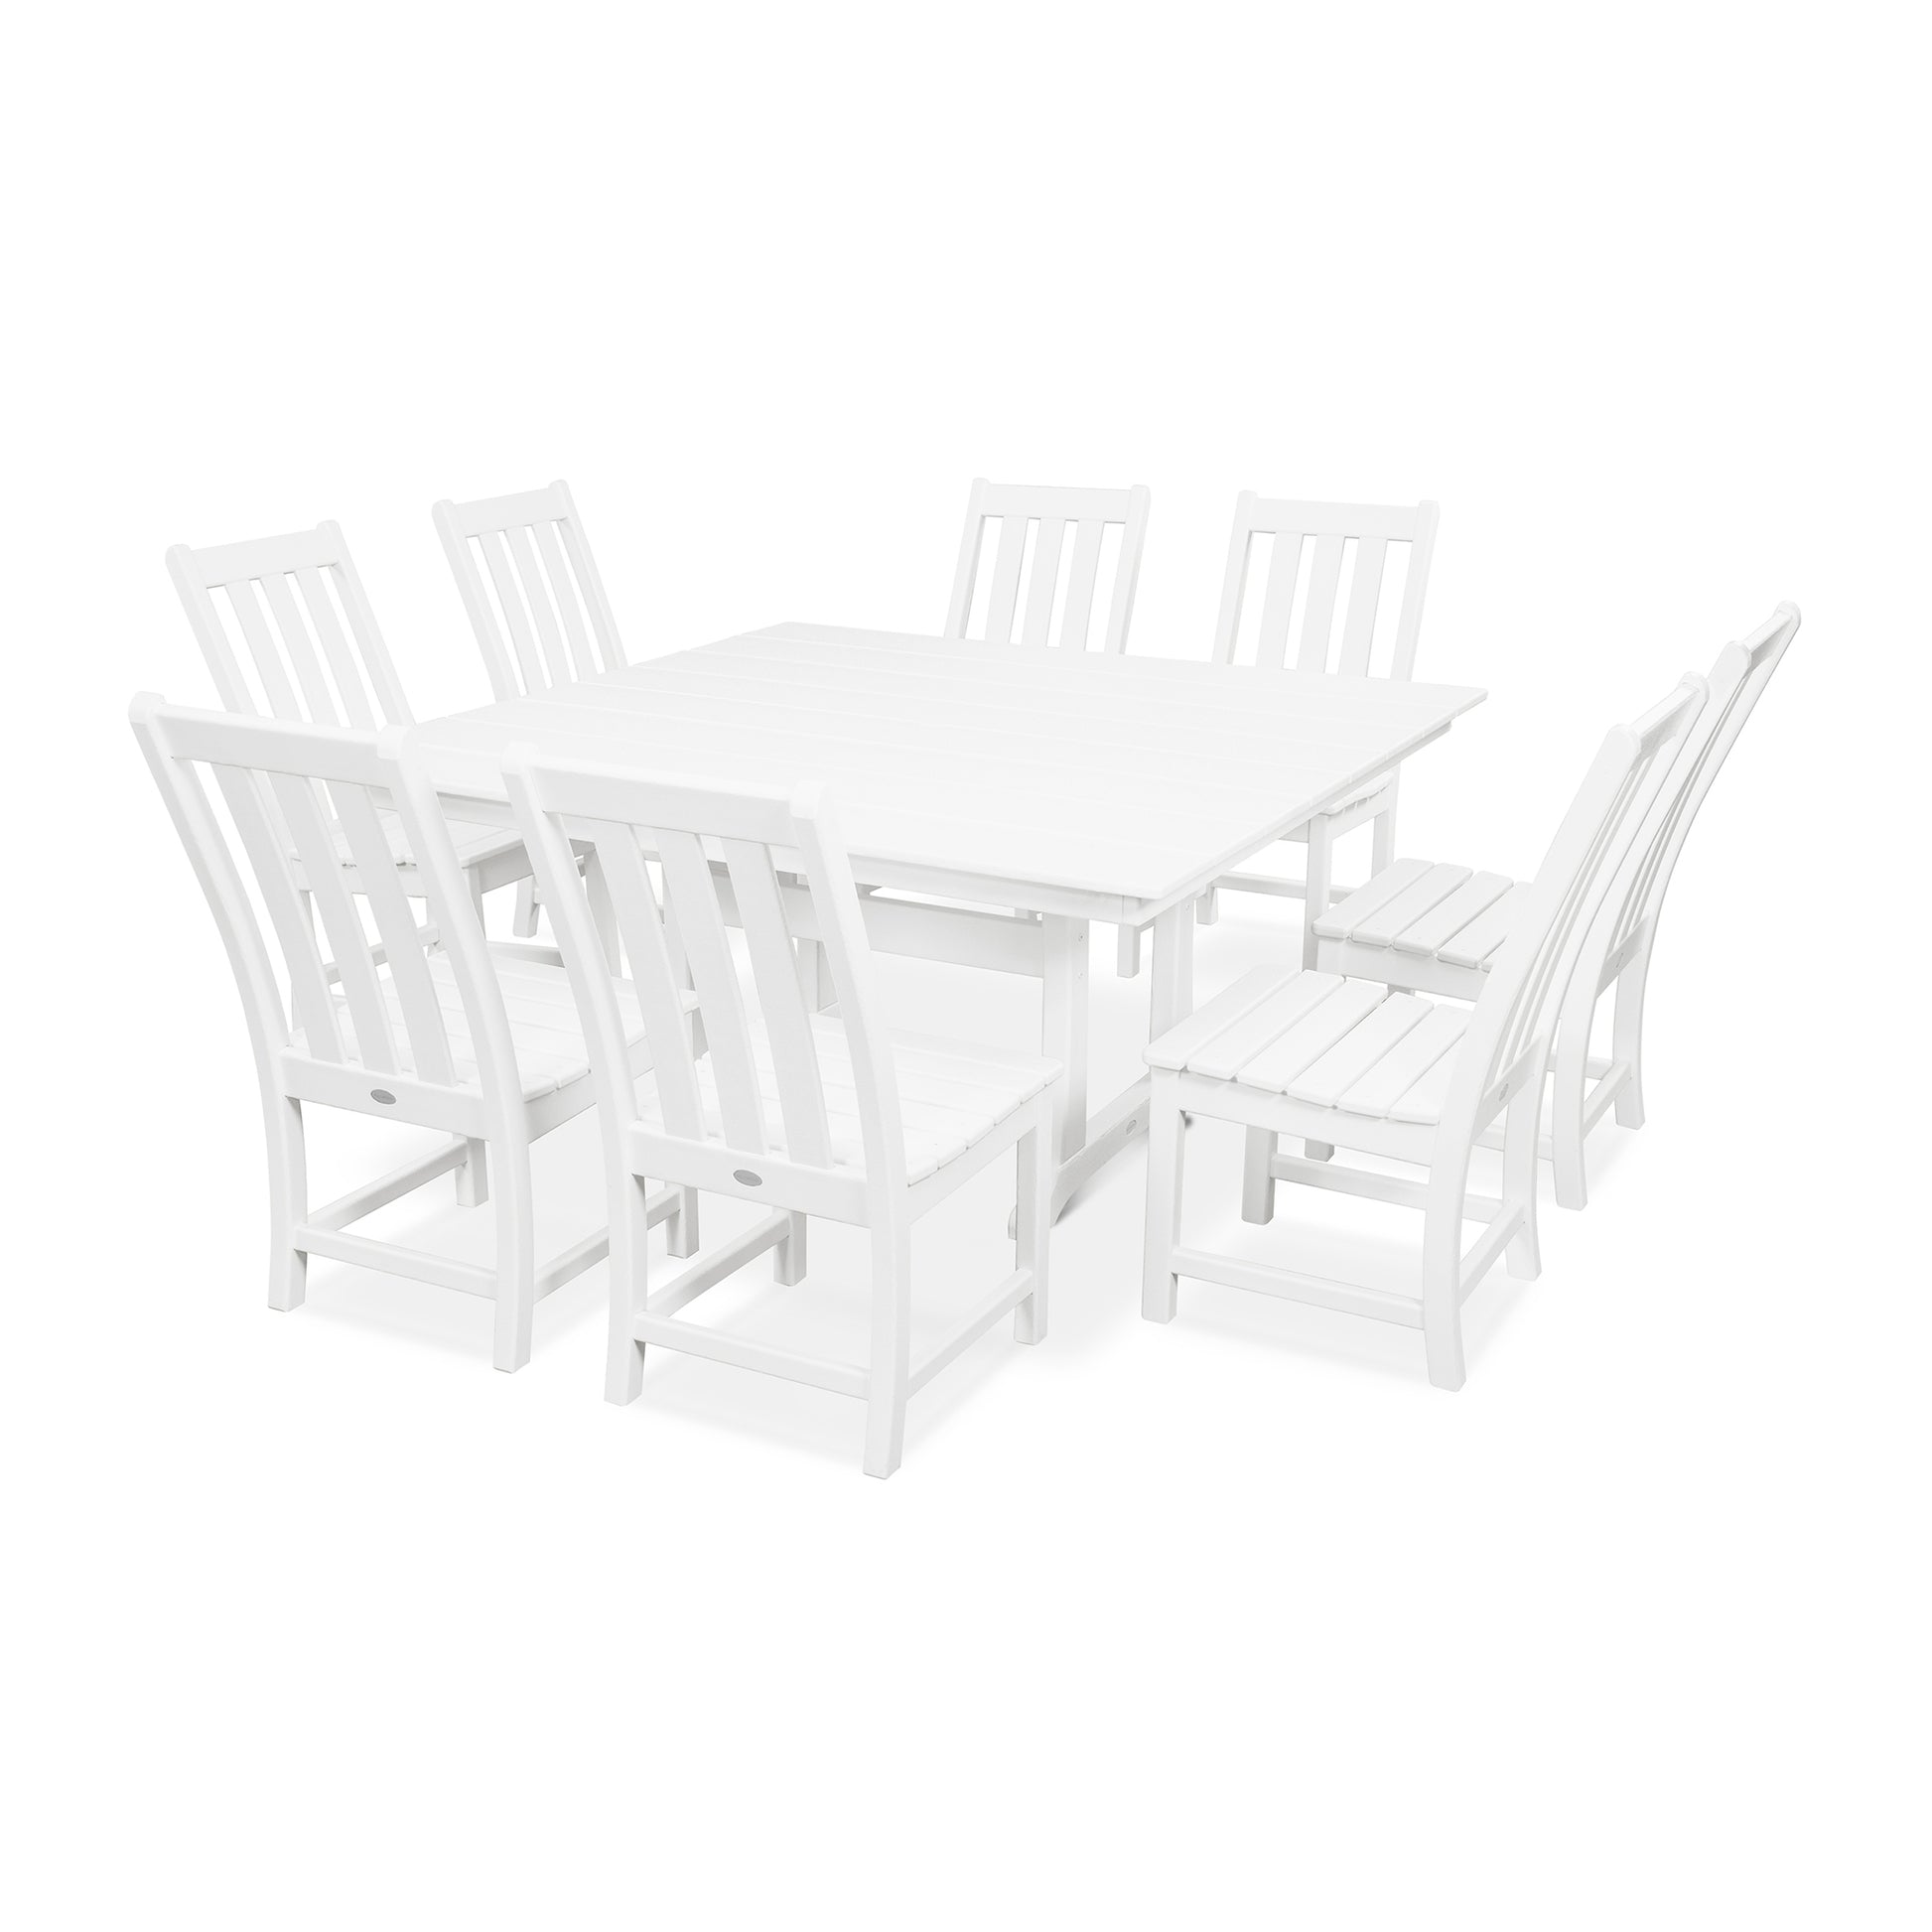 A white POLYWOOD® Vineyard 9-Piece Farmhouse Trestle Dining Set comprising a rectangular table and six matching chairs with slatted backs and seats, arranged on a plain white background.